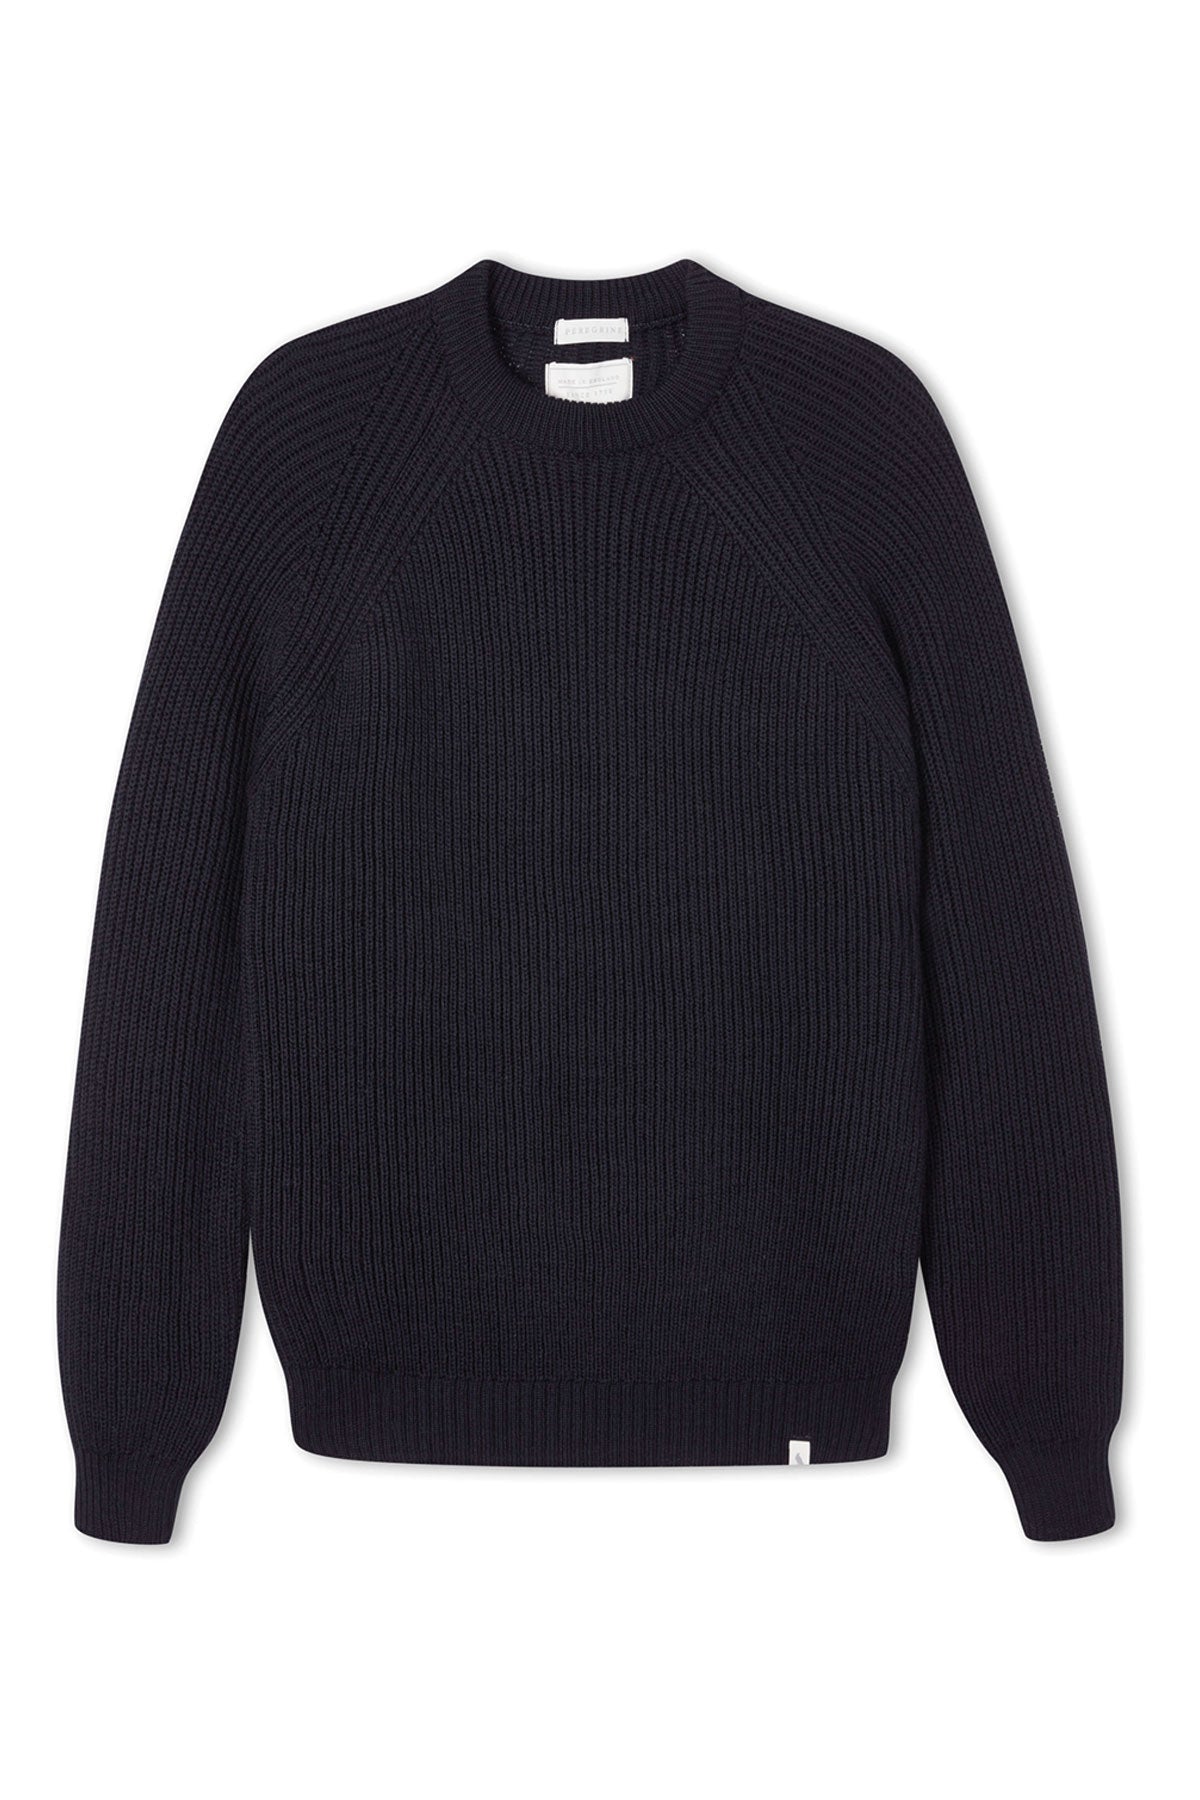 Peregrine Ford Crew Jumper In Navy The Rugged Society